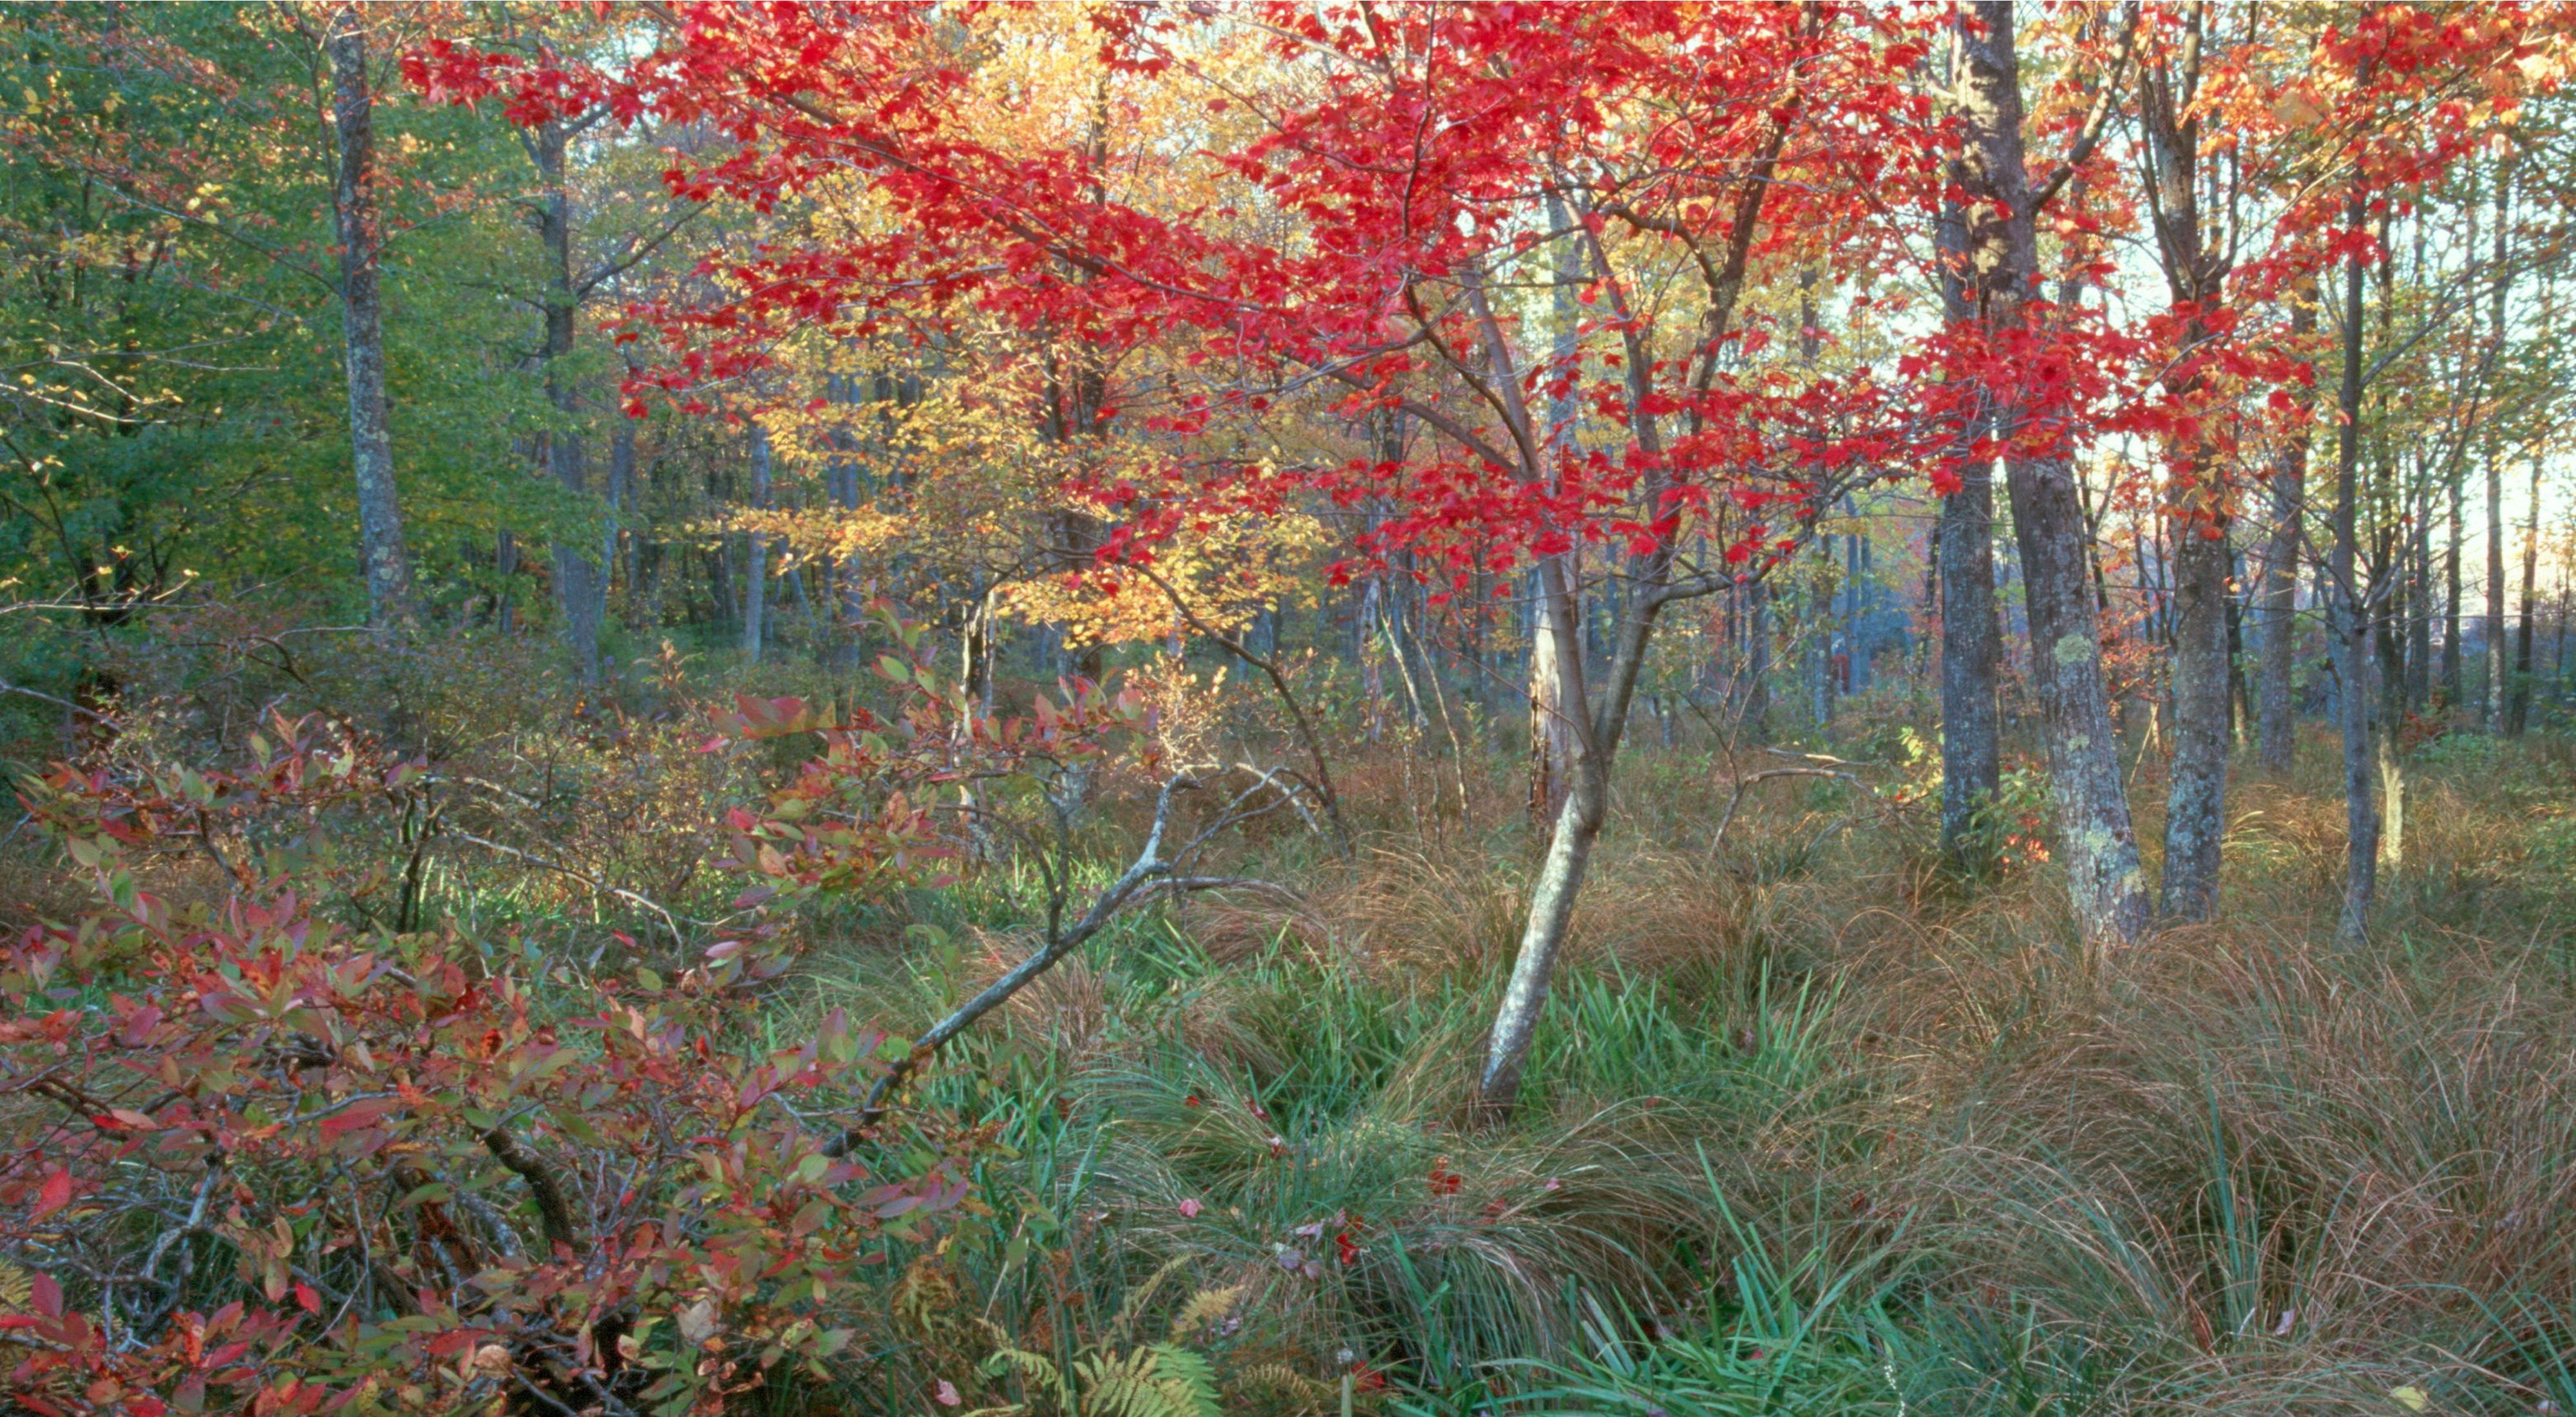 Trees with vibrant red and yellow leaves grow in a forest.